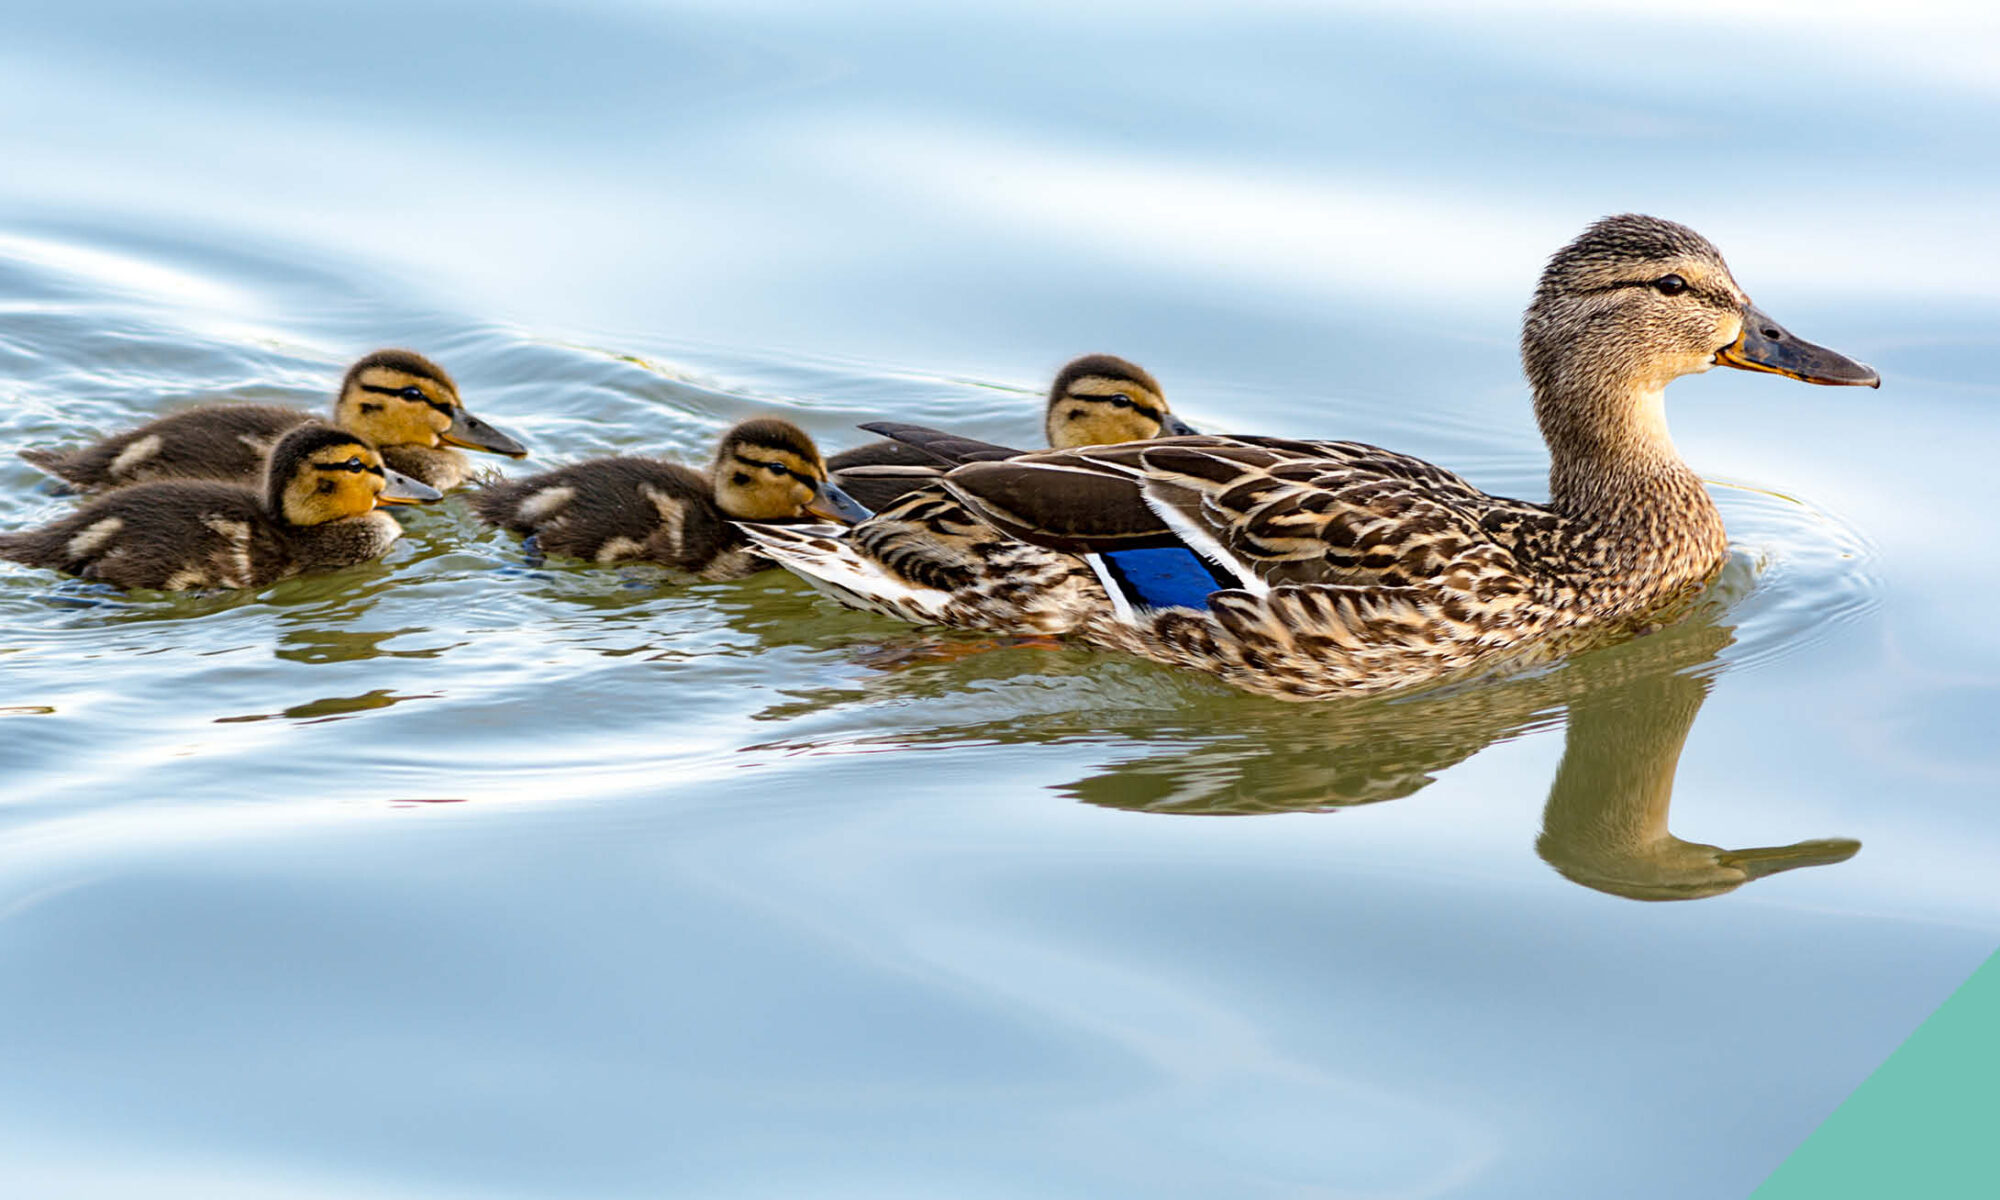 A duck swimming with her ducklings following